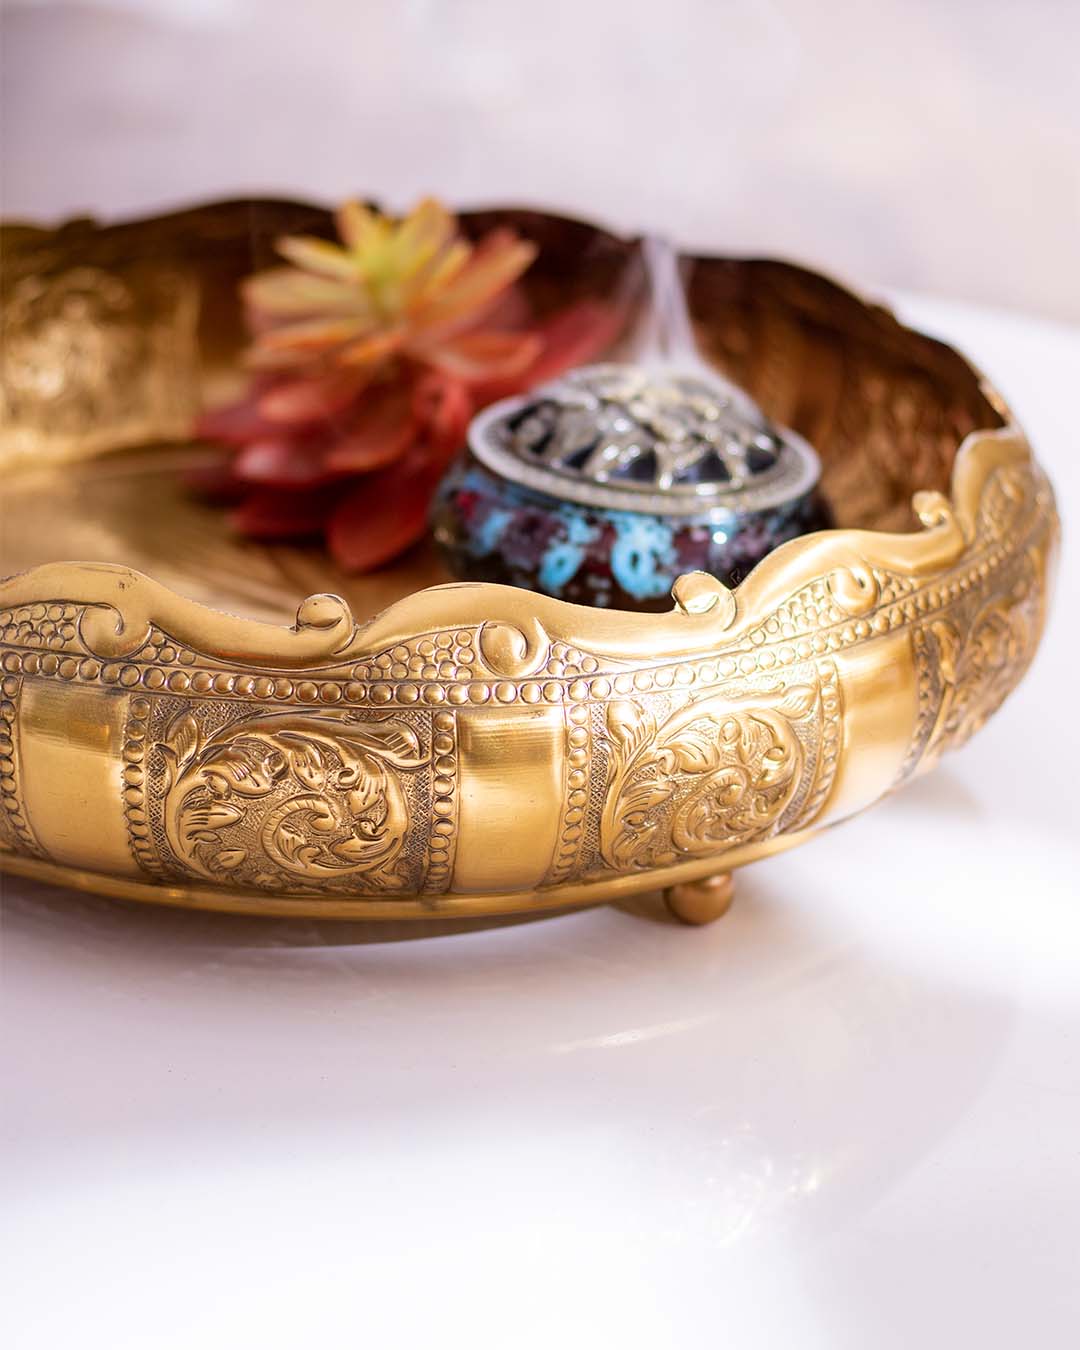 'Embossed' Handcrafted Bowl - 11"